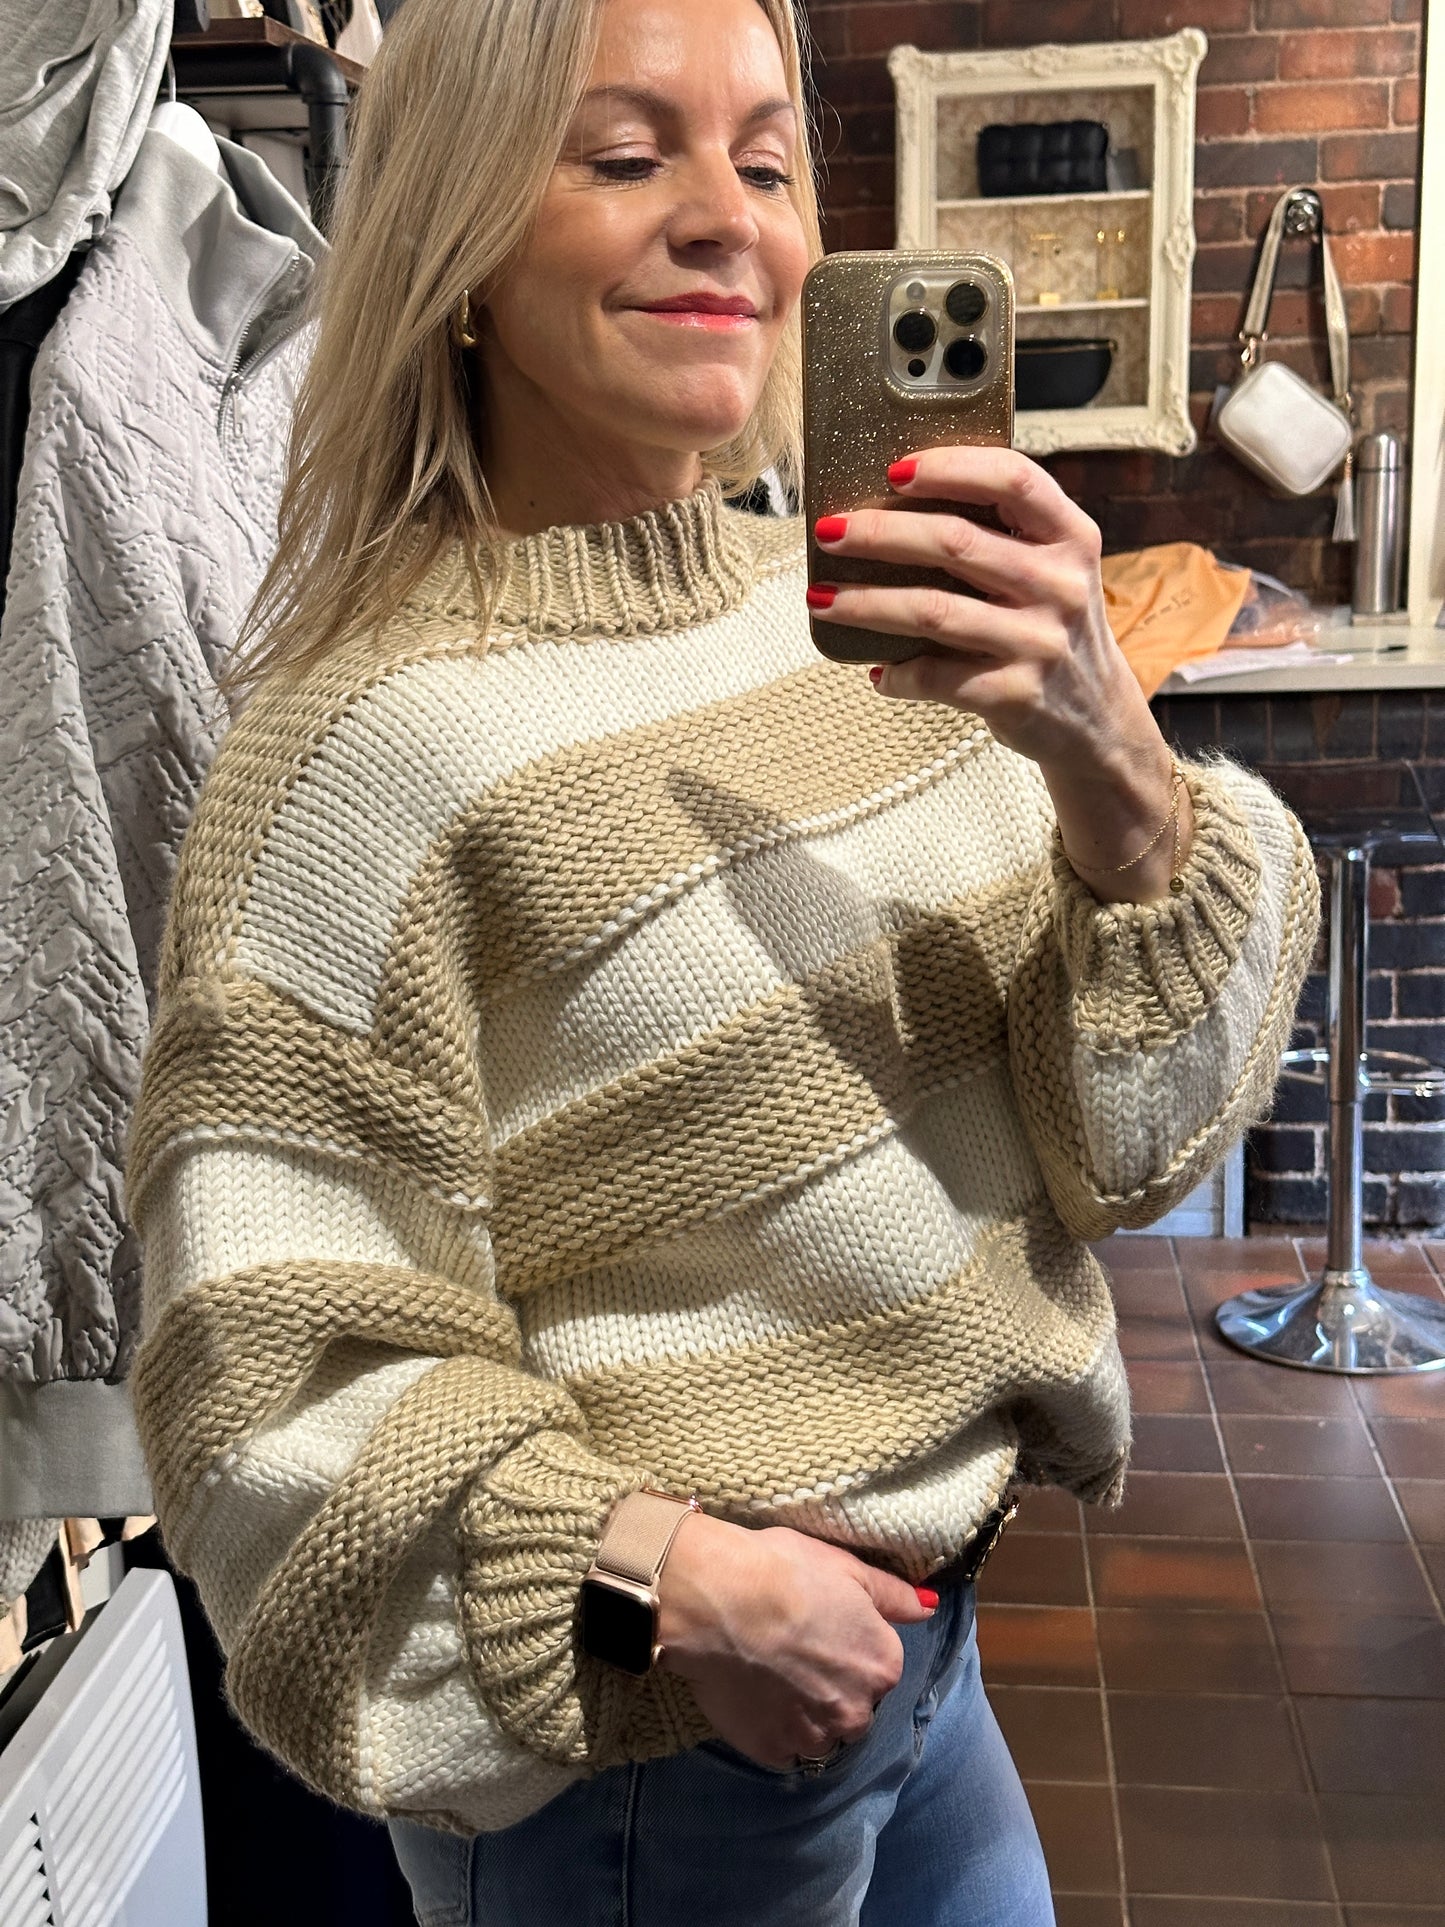 Byoung BYNOEMI Striped sweater WAS £59.99